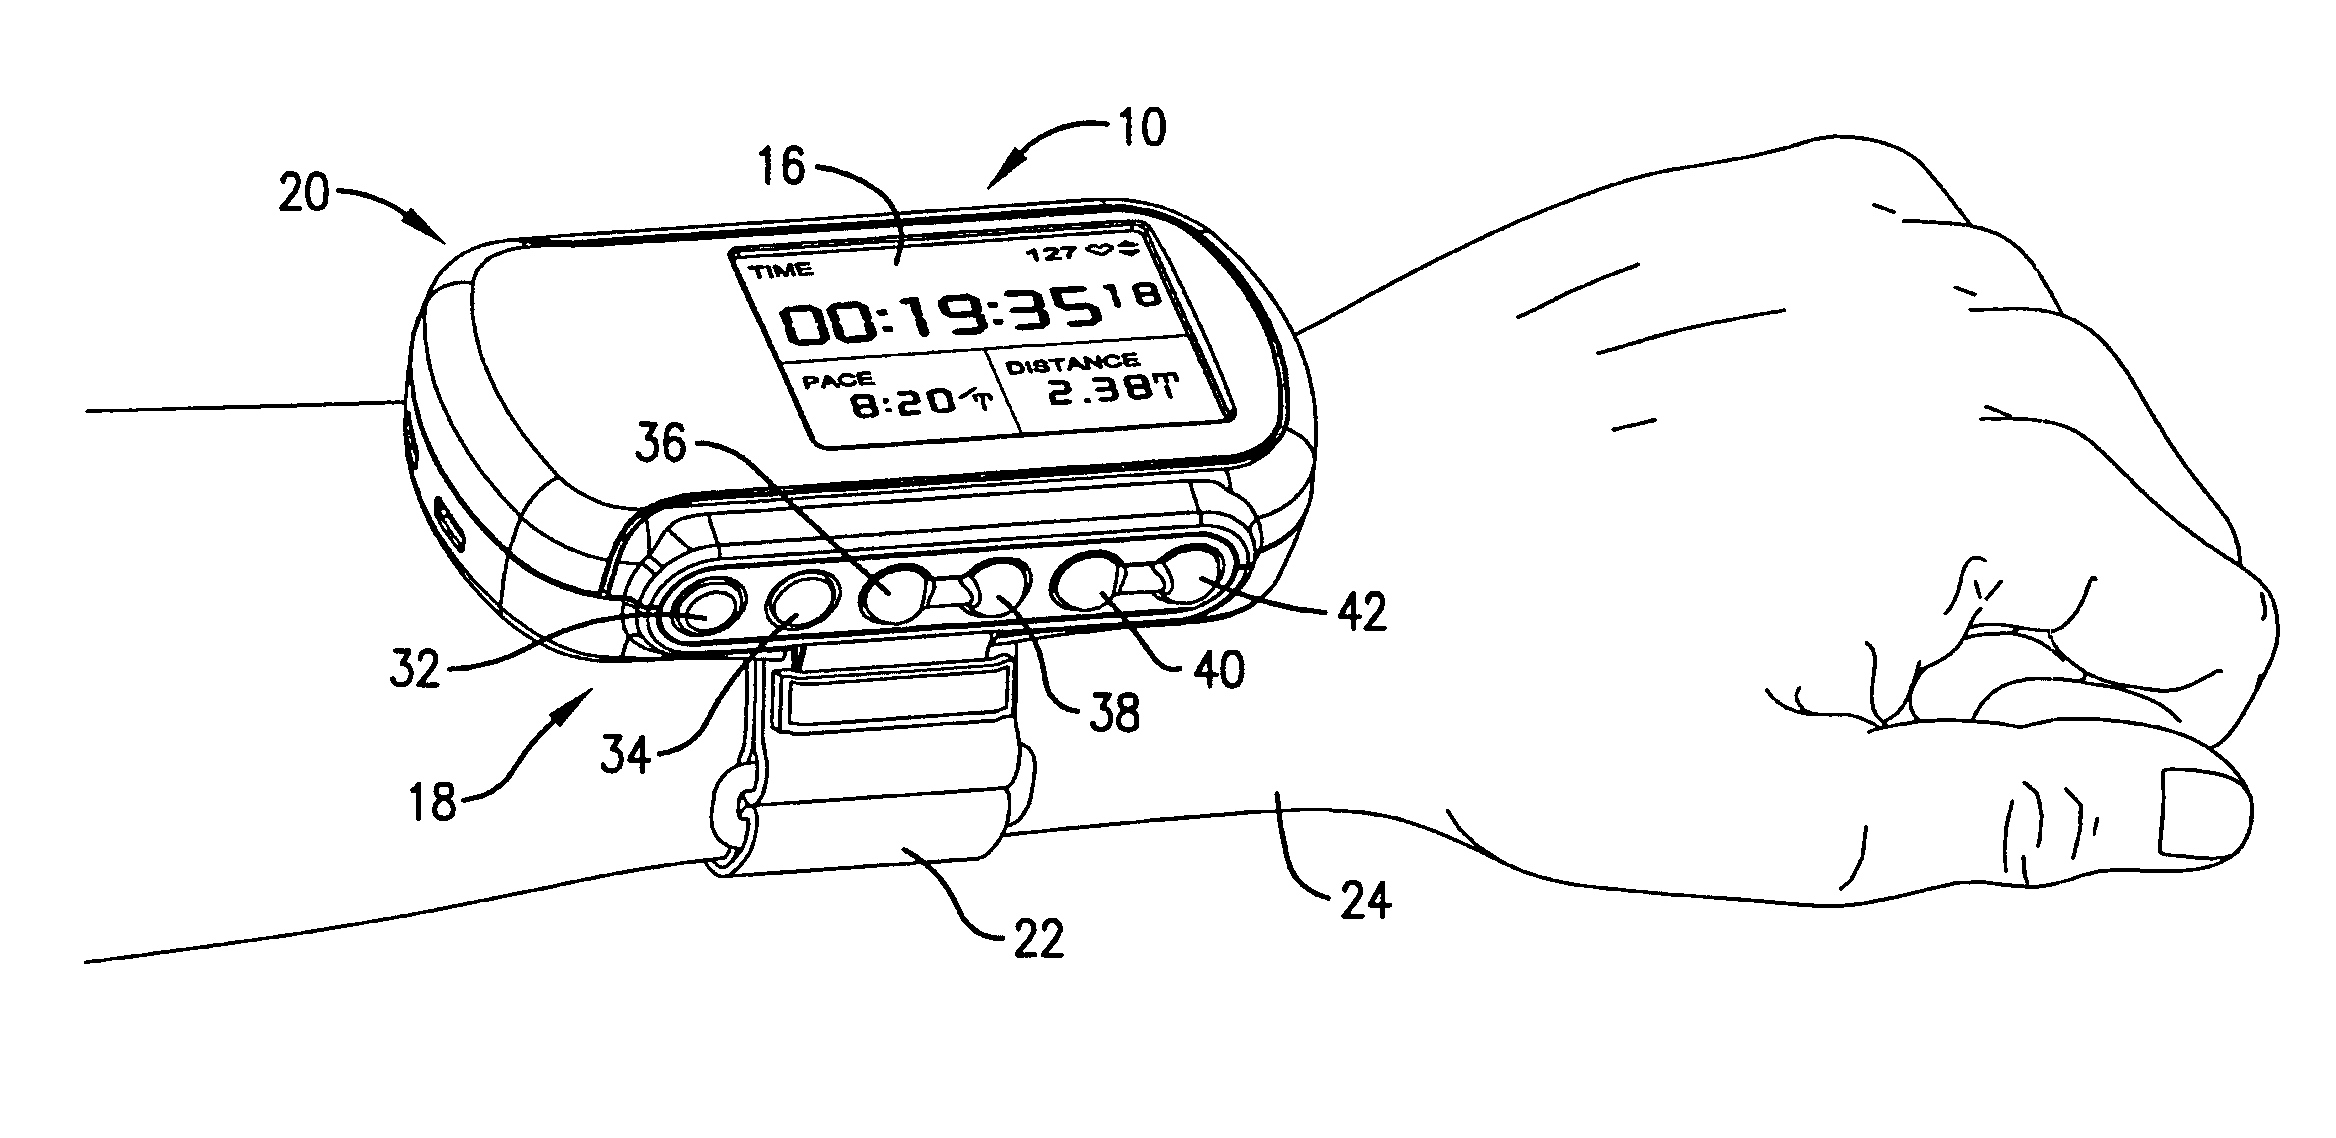 Navigation-assisted fitness and dieting device